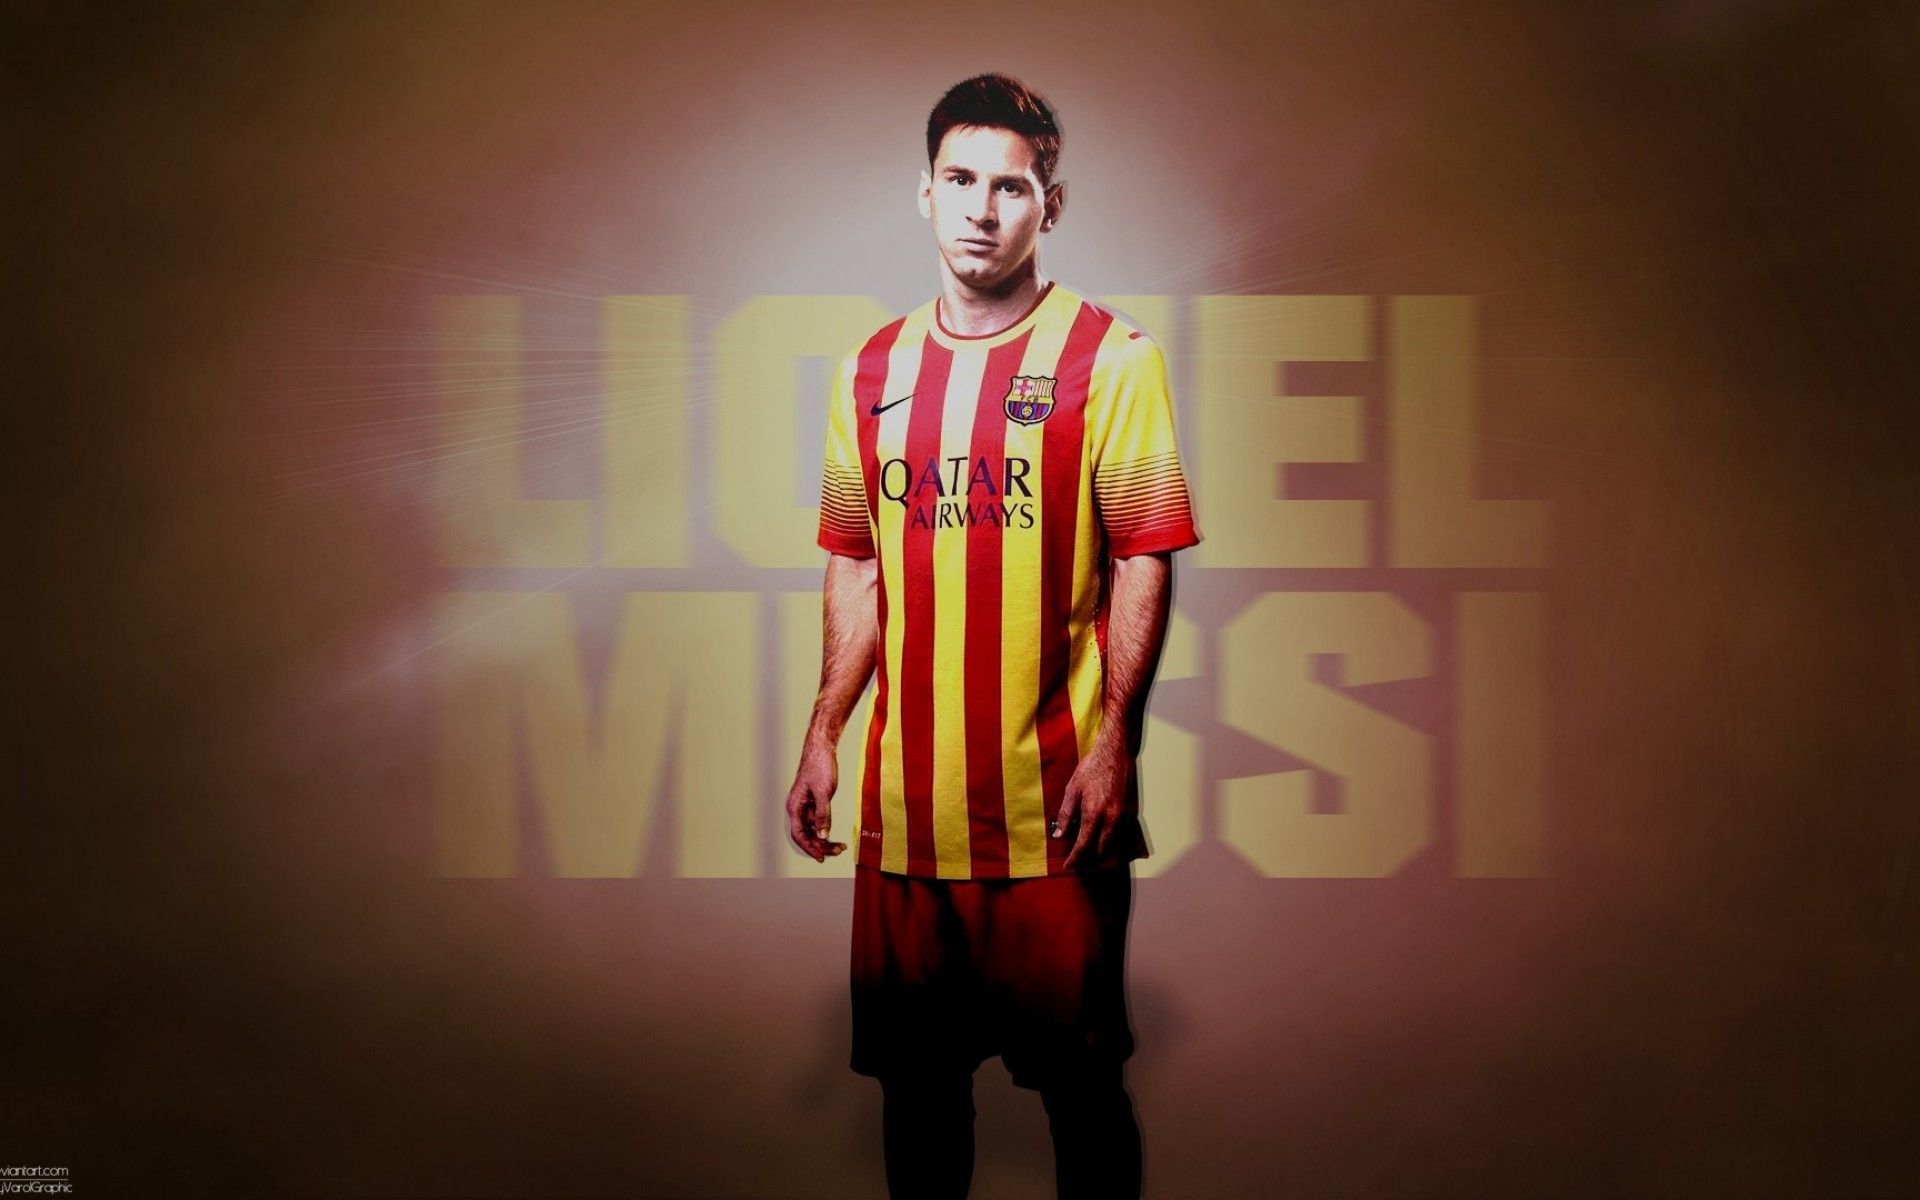 Wallpaper, T shirt, red, photography, fashion, spring, clothing, Lionel Messi, color, 1920x1200 px, photo shoot 1920x1200